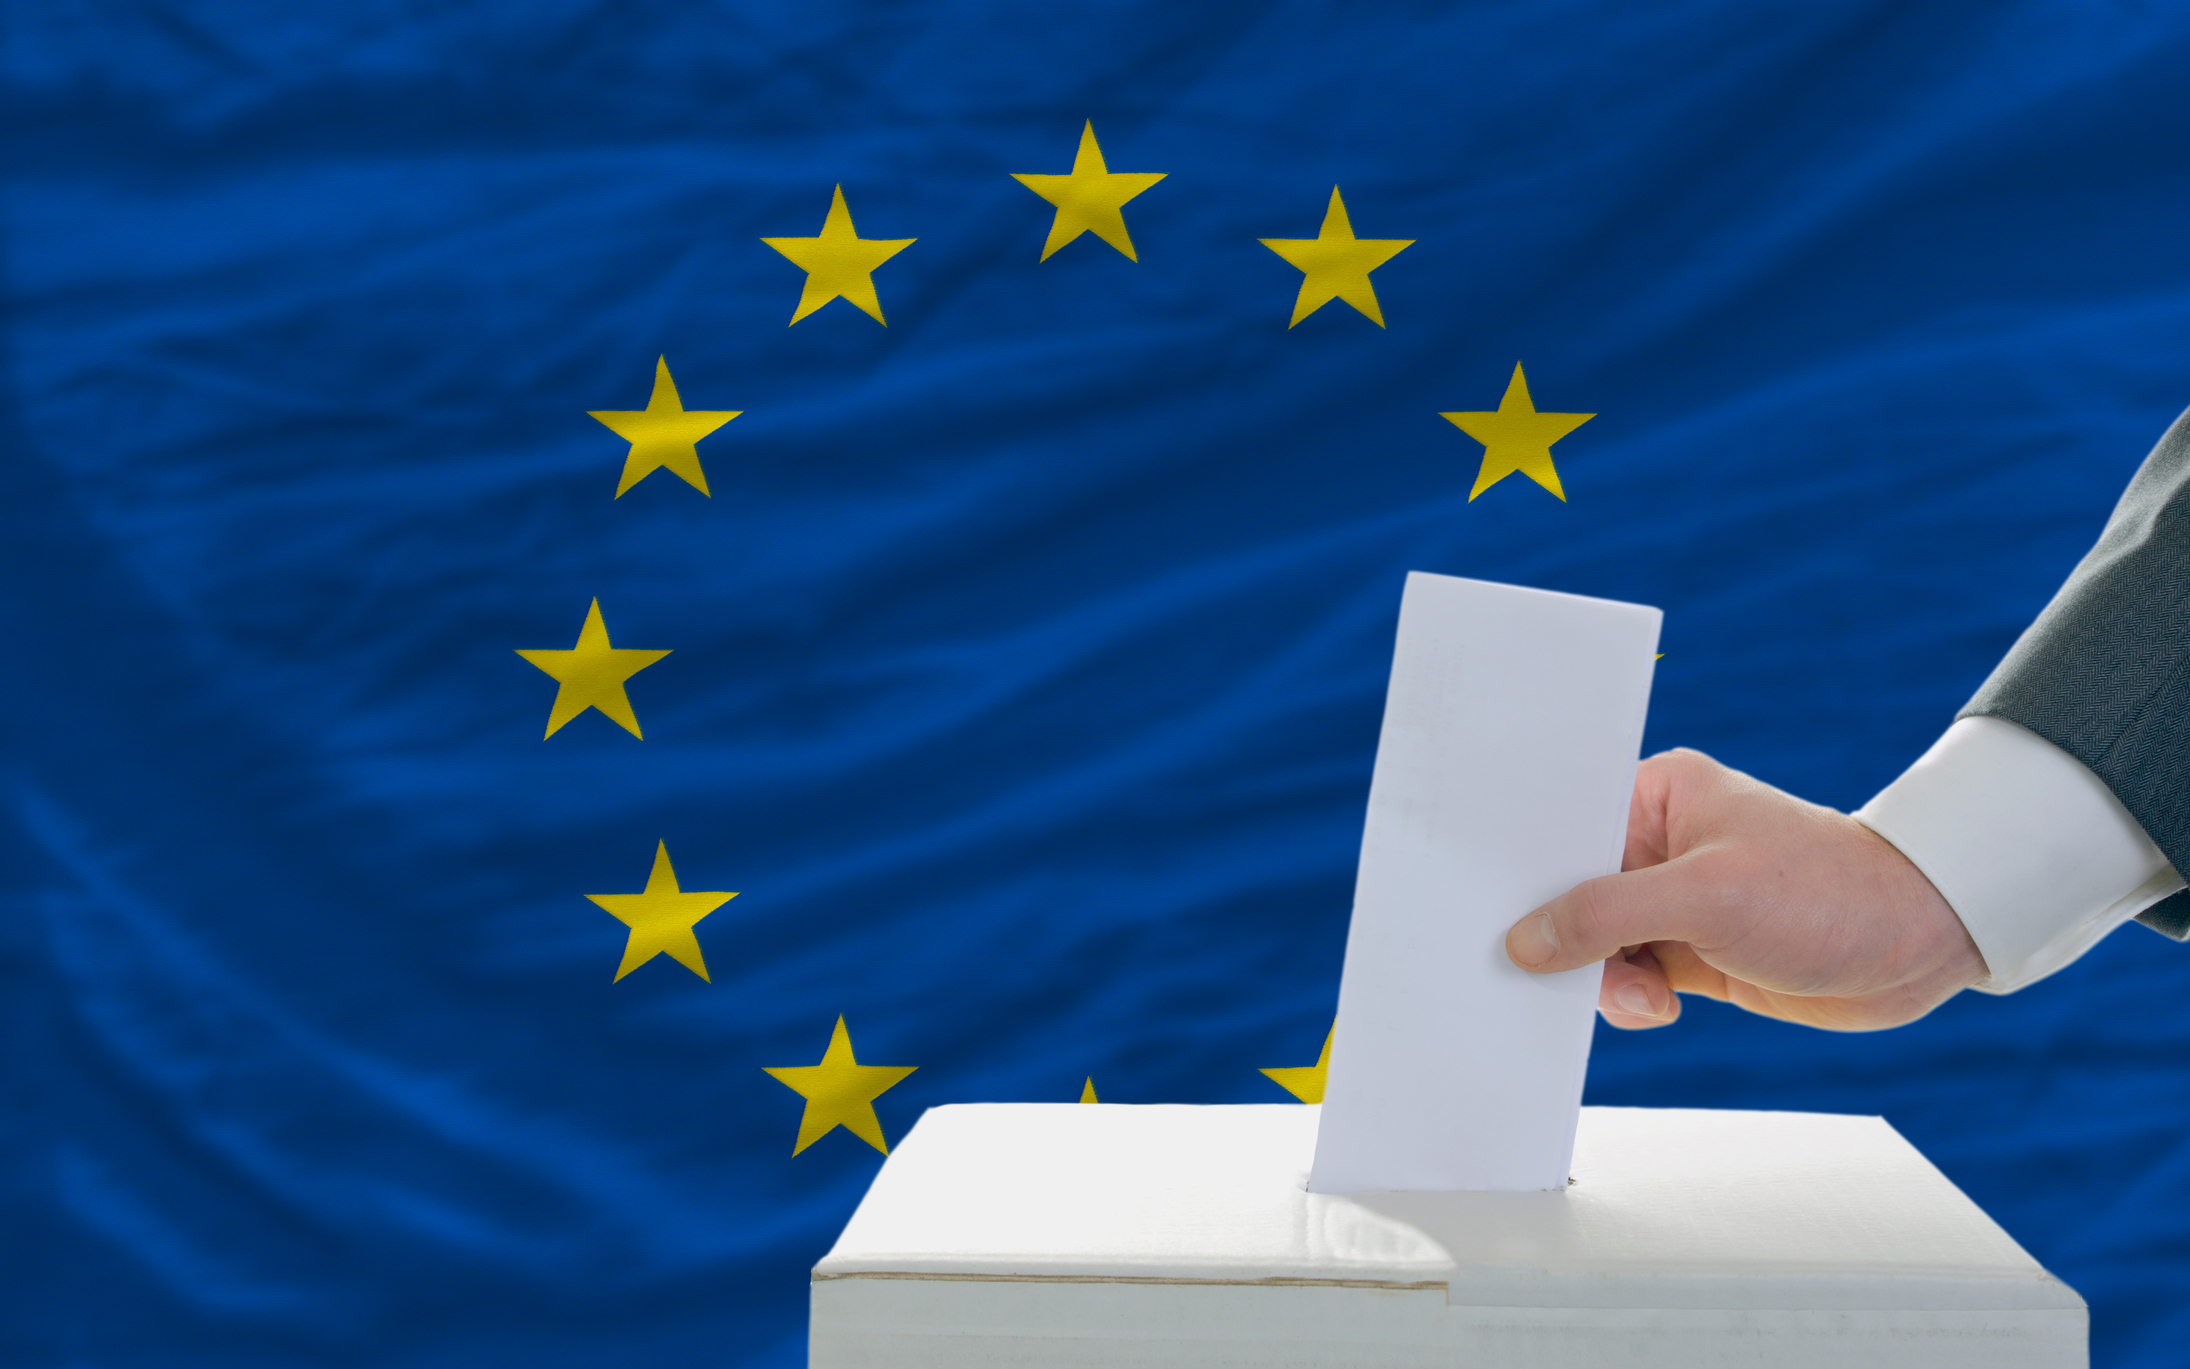 60% of Romanians interested in European elections, Eurobarometer survey reveals